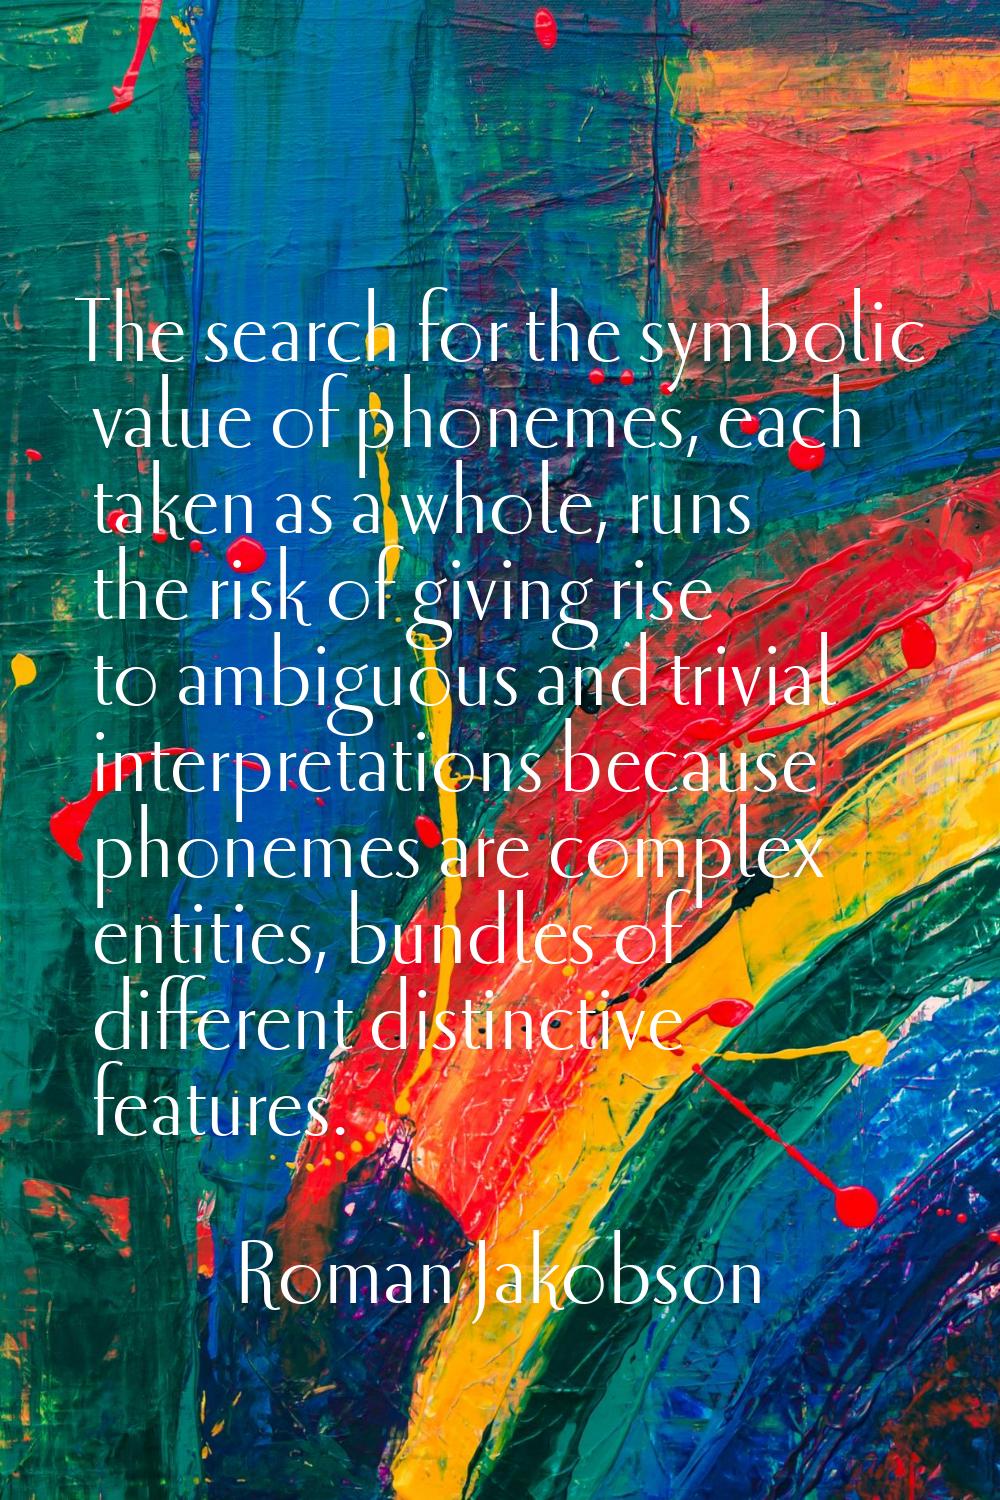 The search for the symbolic value of phonemes, each taken as a whole, runs the risk of giving rise 